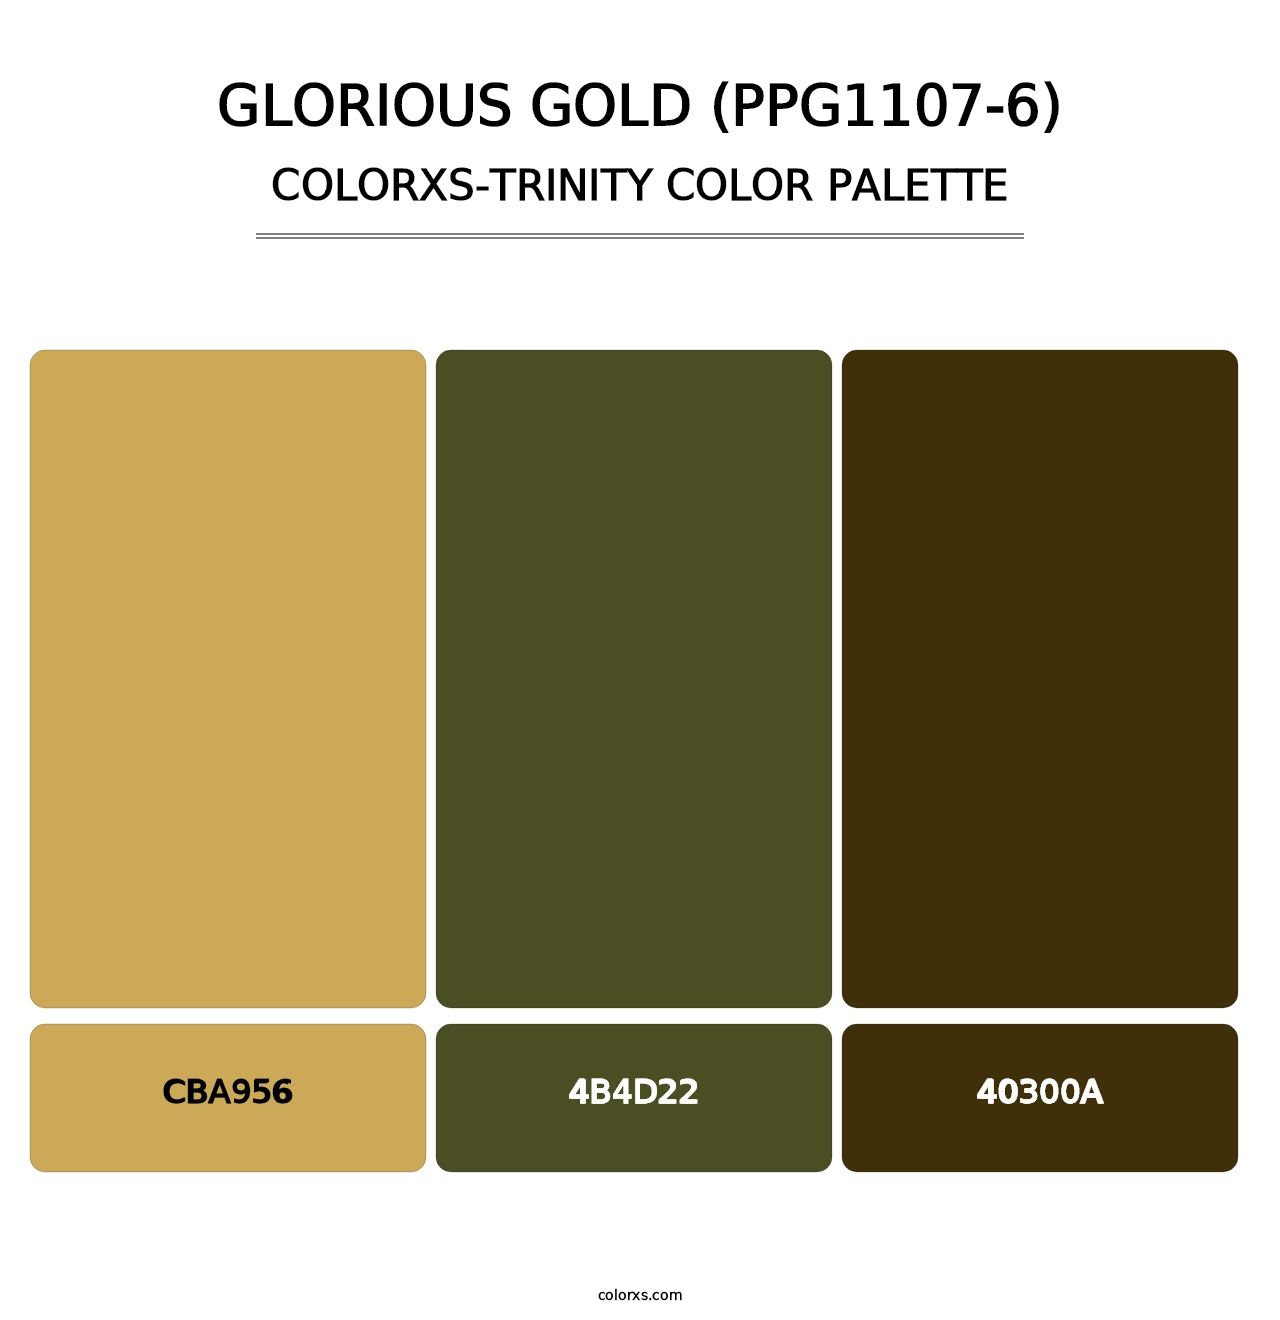 Glorious Gold (PPG1107-6) - Colorxs Trinity Palette